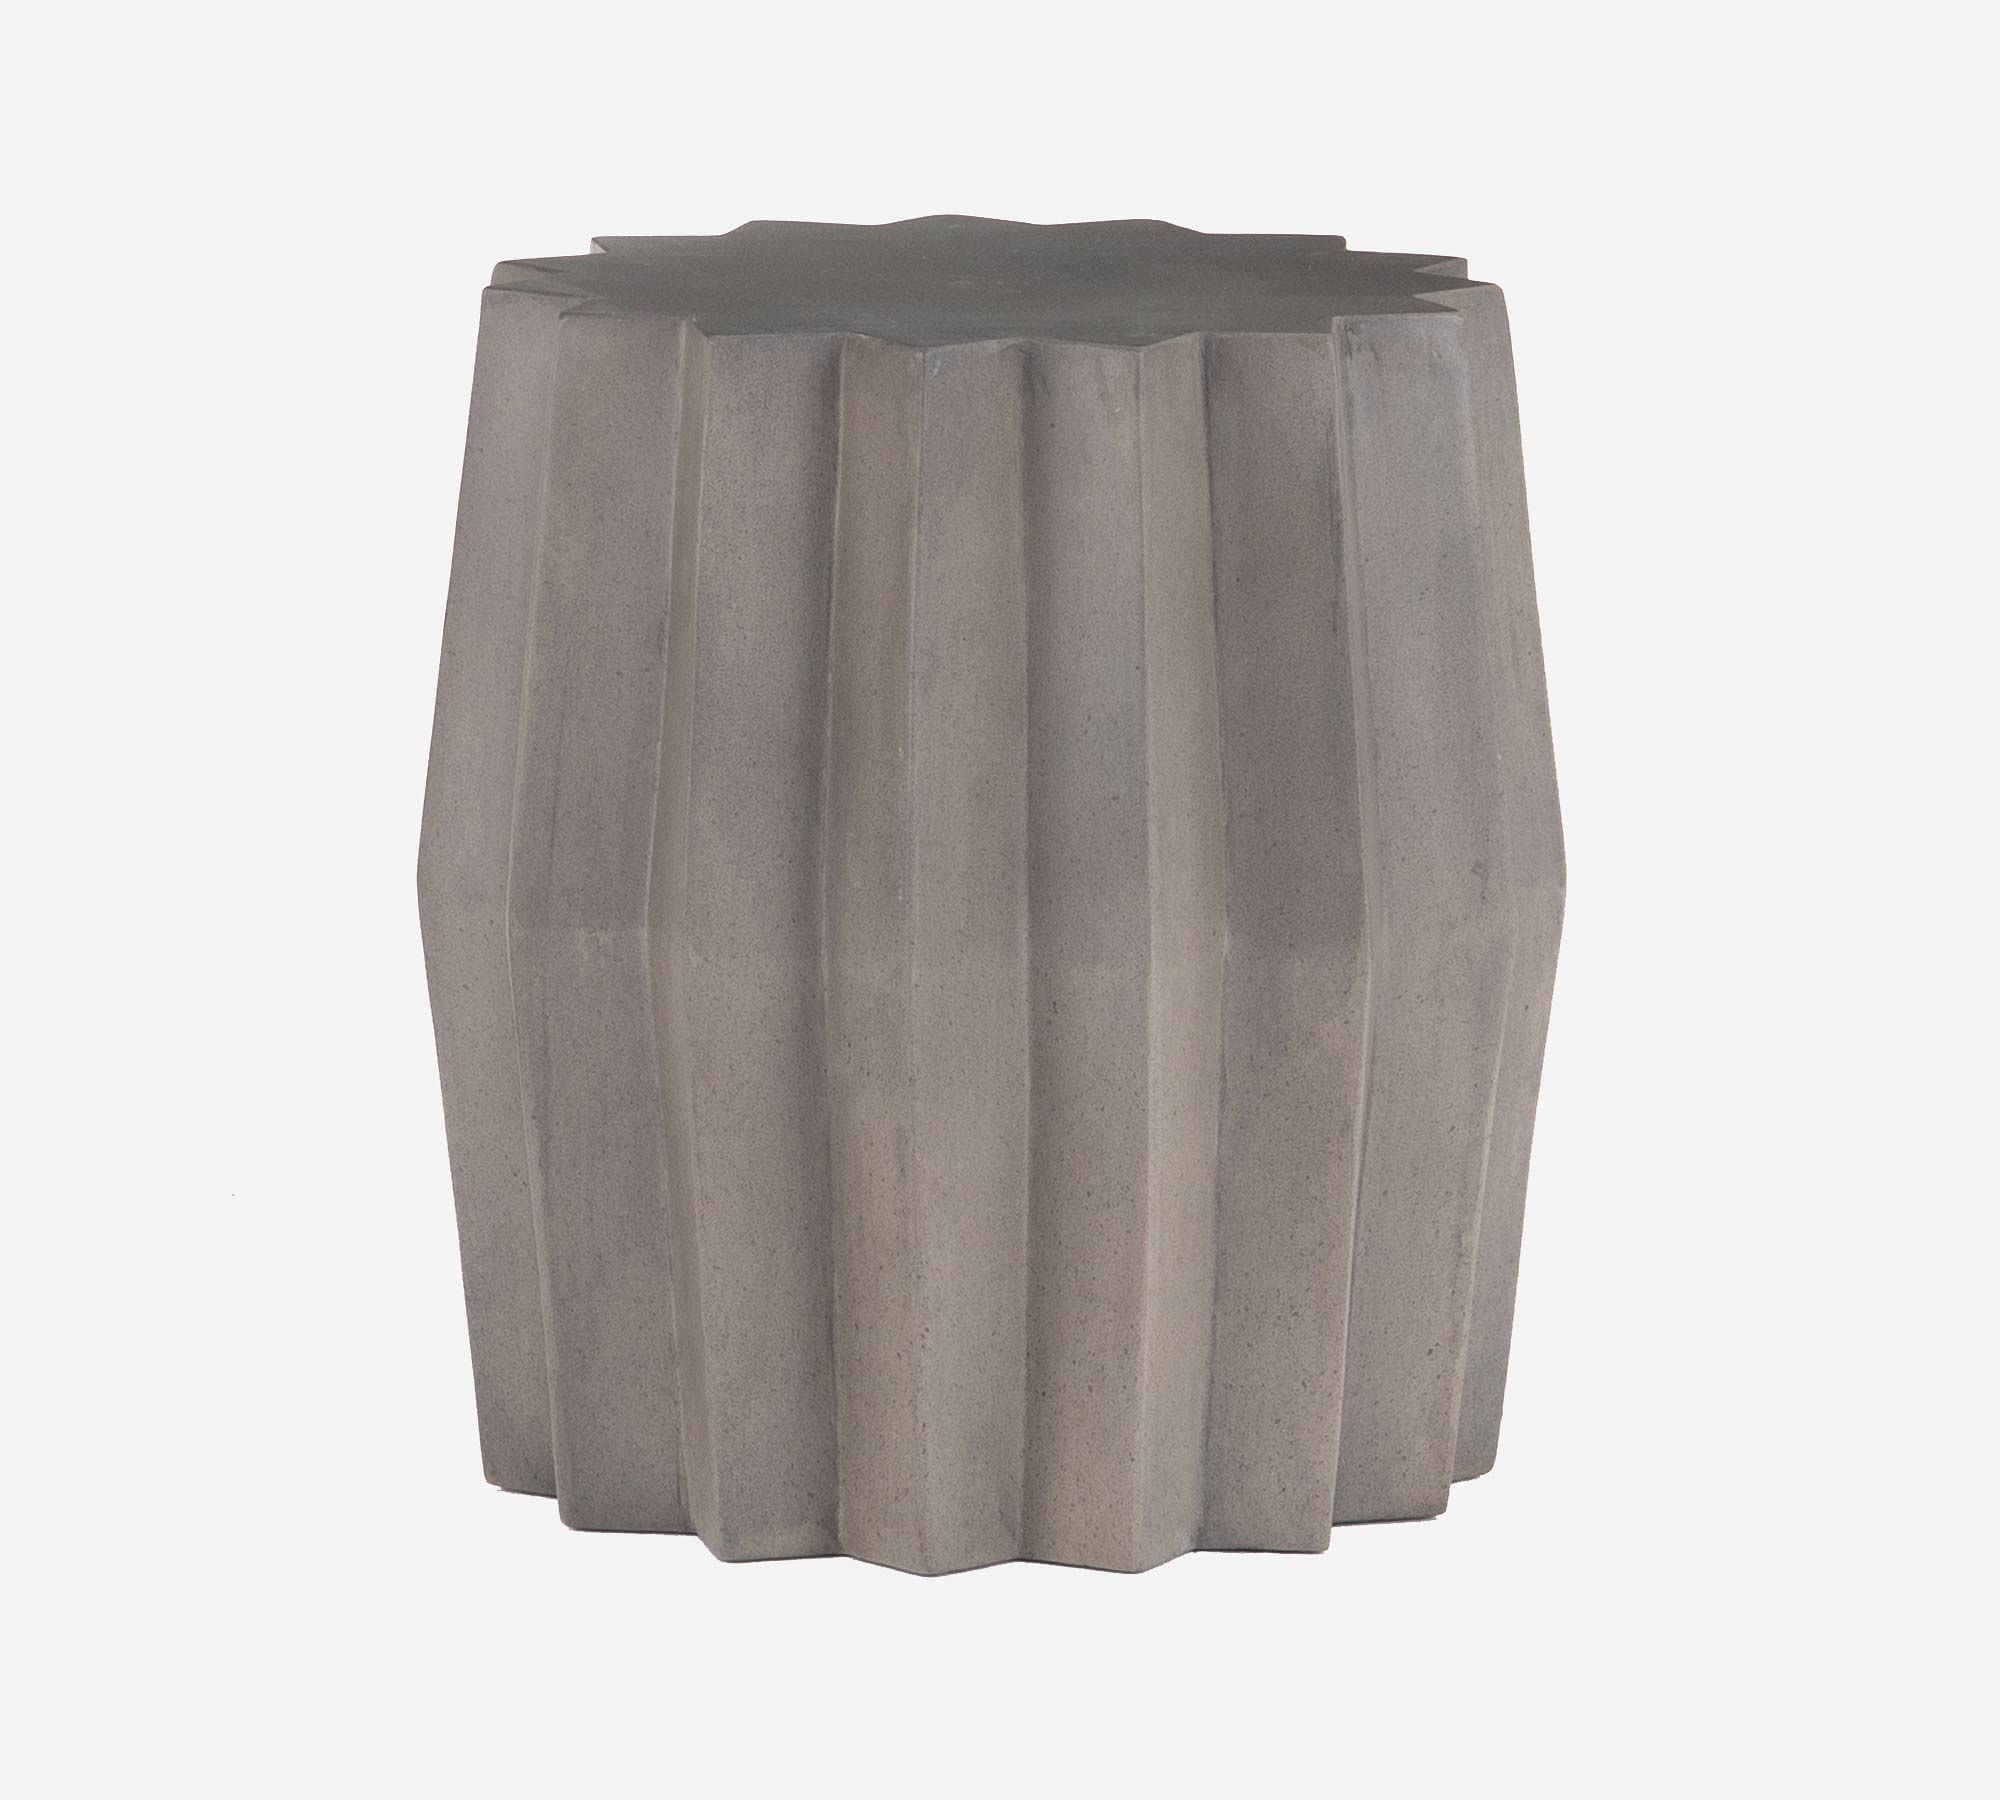 Verity 18.5" Concrete Round Outdoor End Table